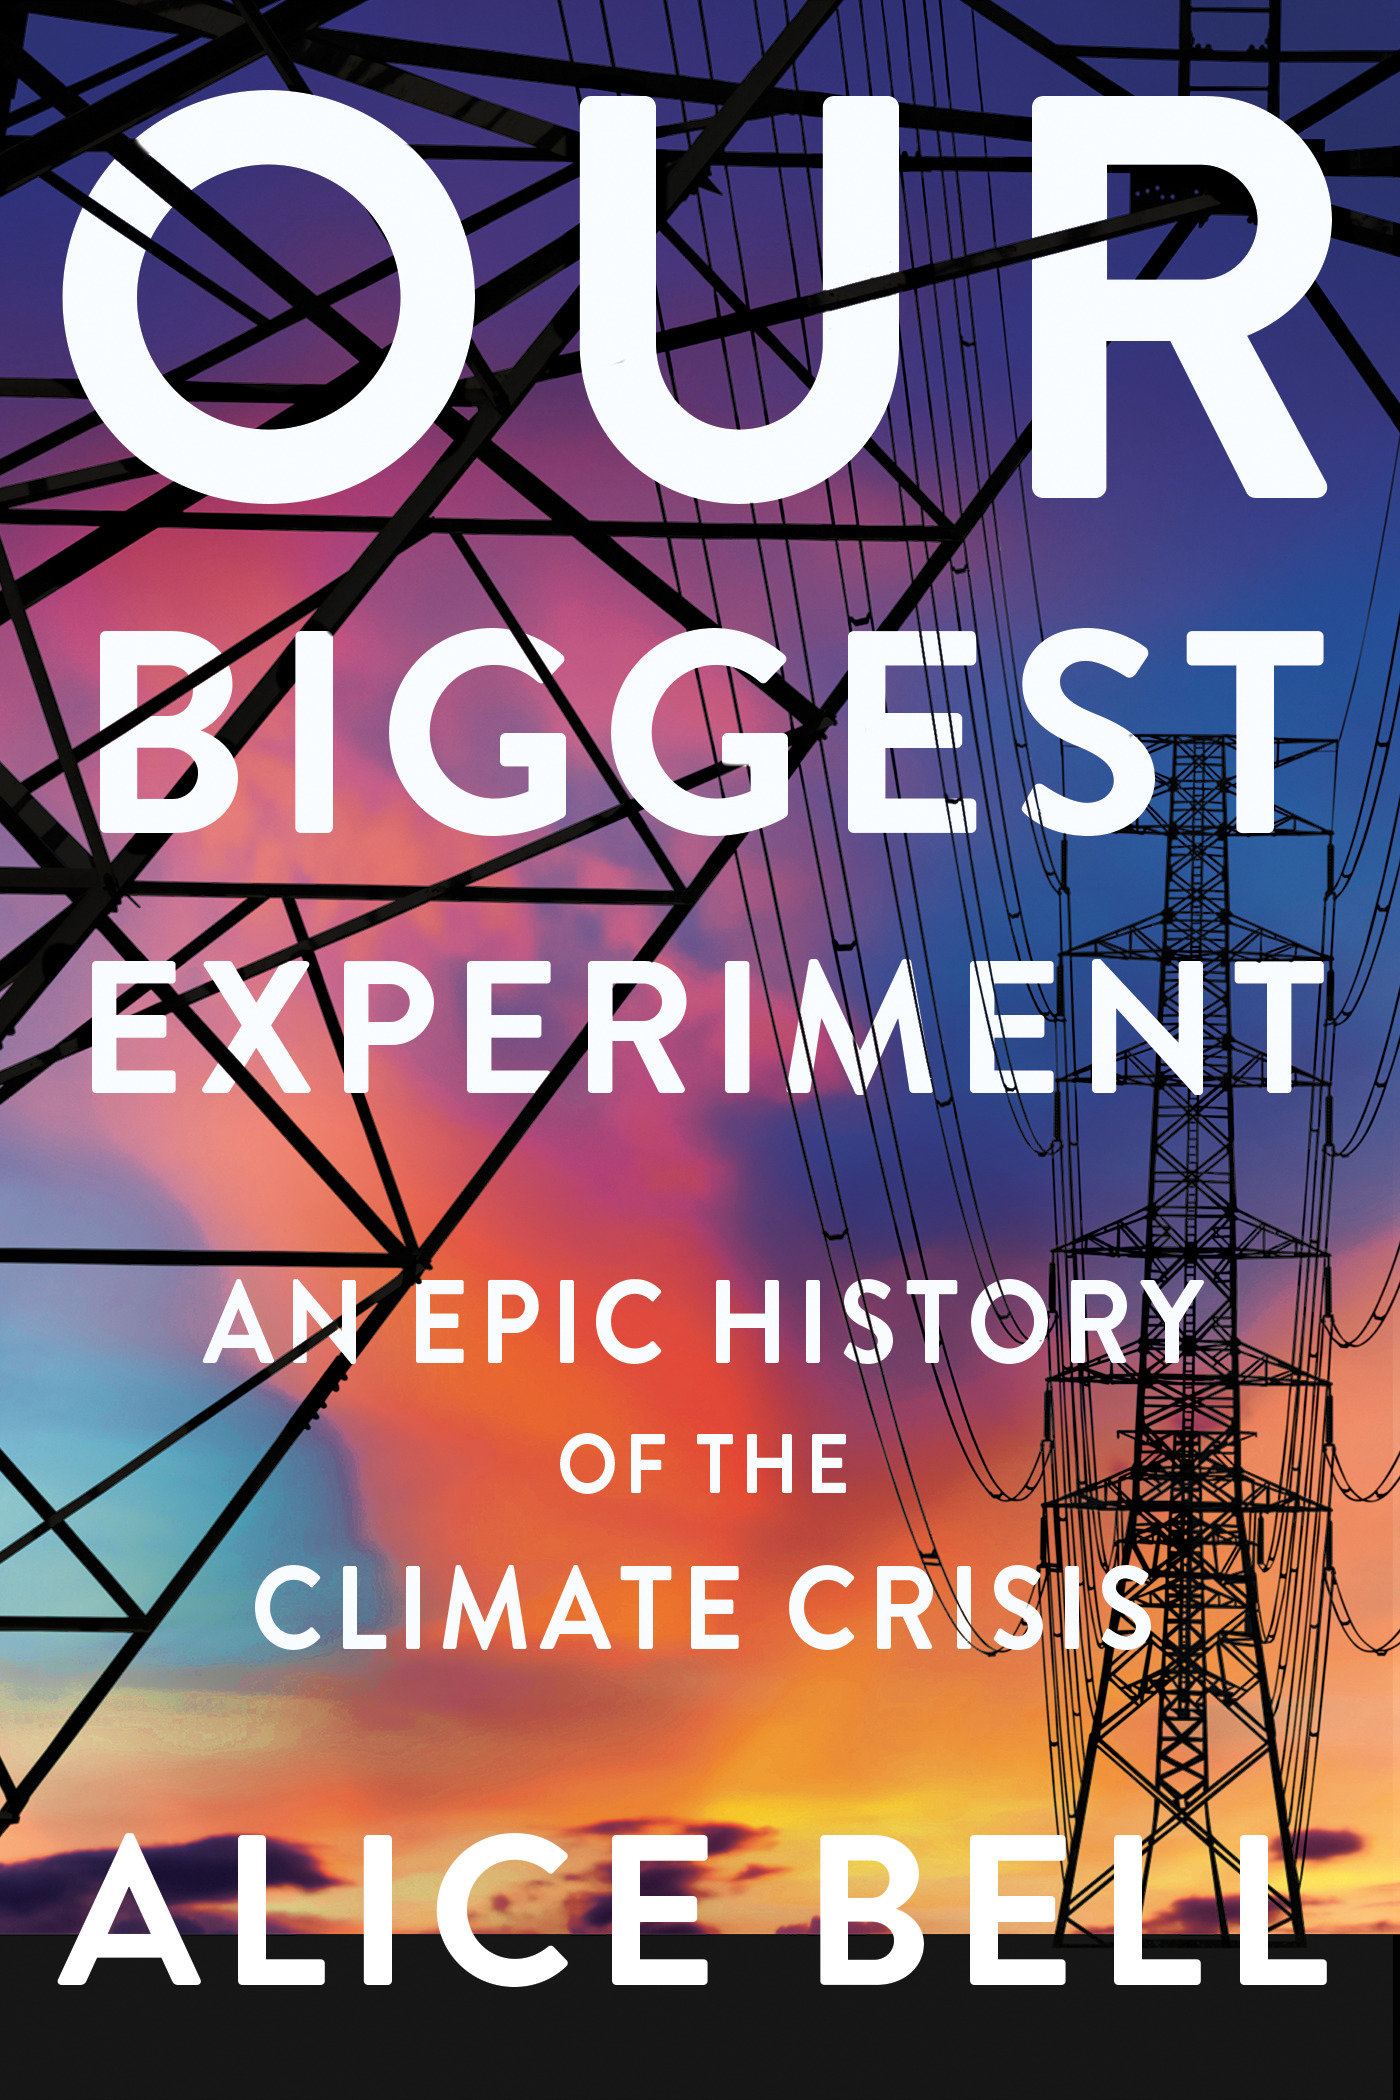 Our Biggest Experiment (Hardcover Book)